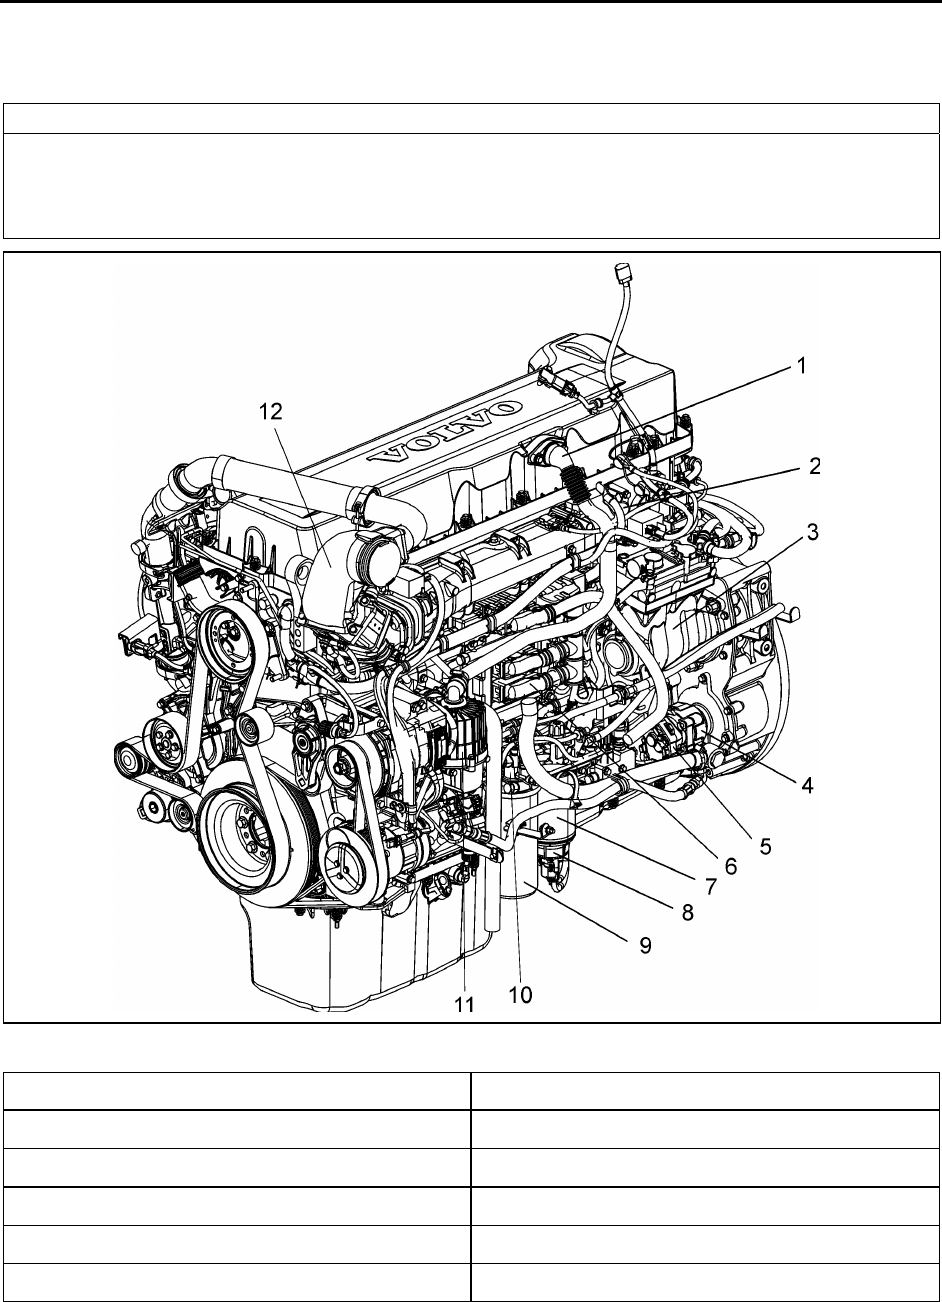 Volvo D13 Users Manual ManualsLib Makes It Easy To Find Manuals Online!